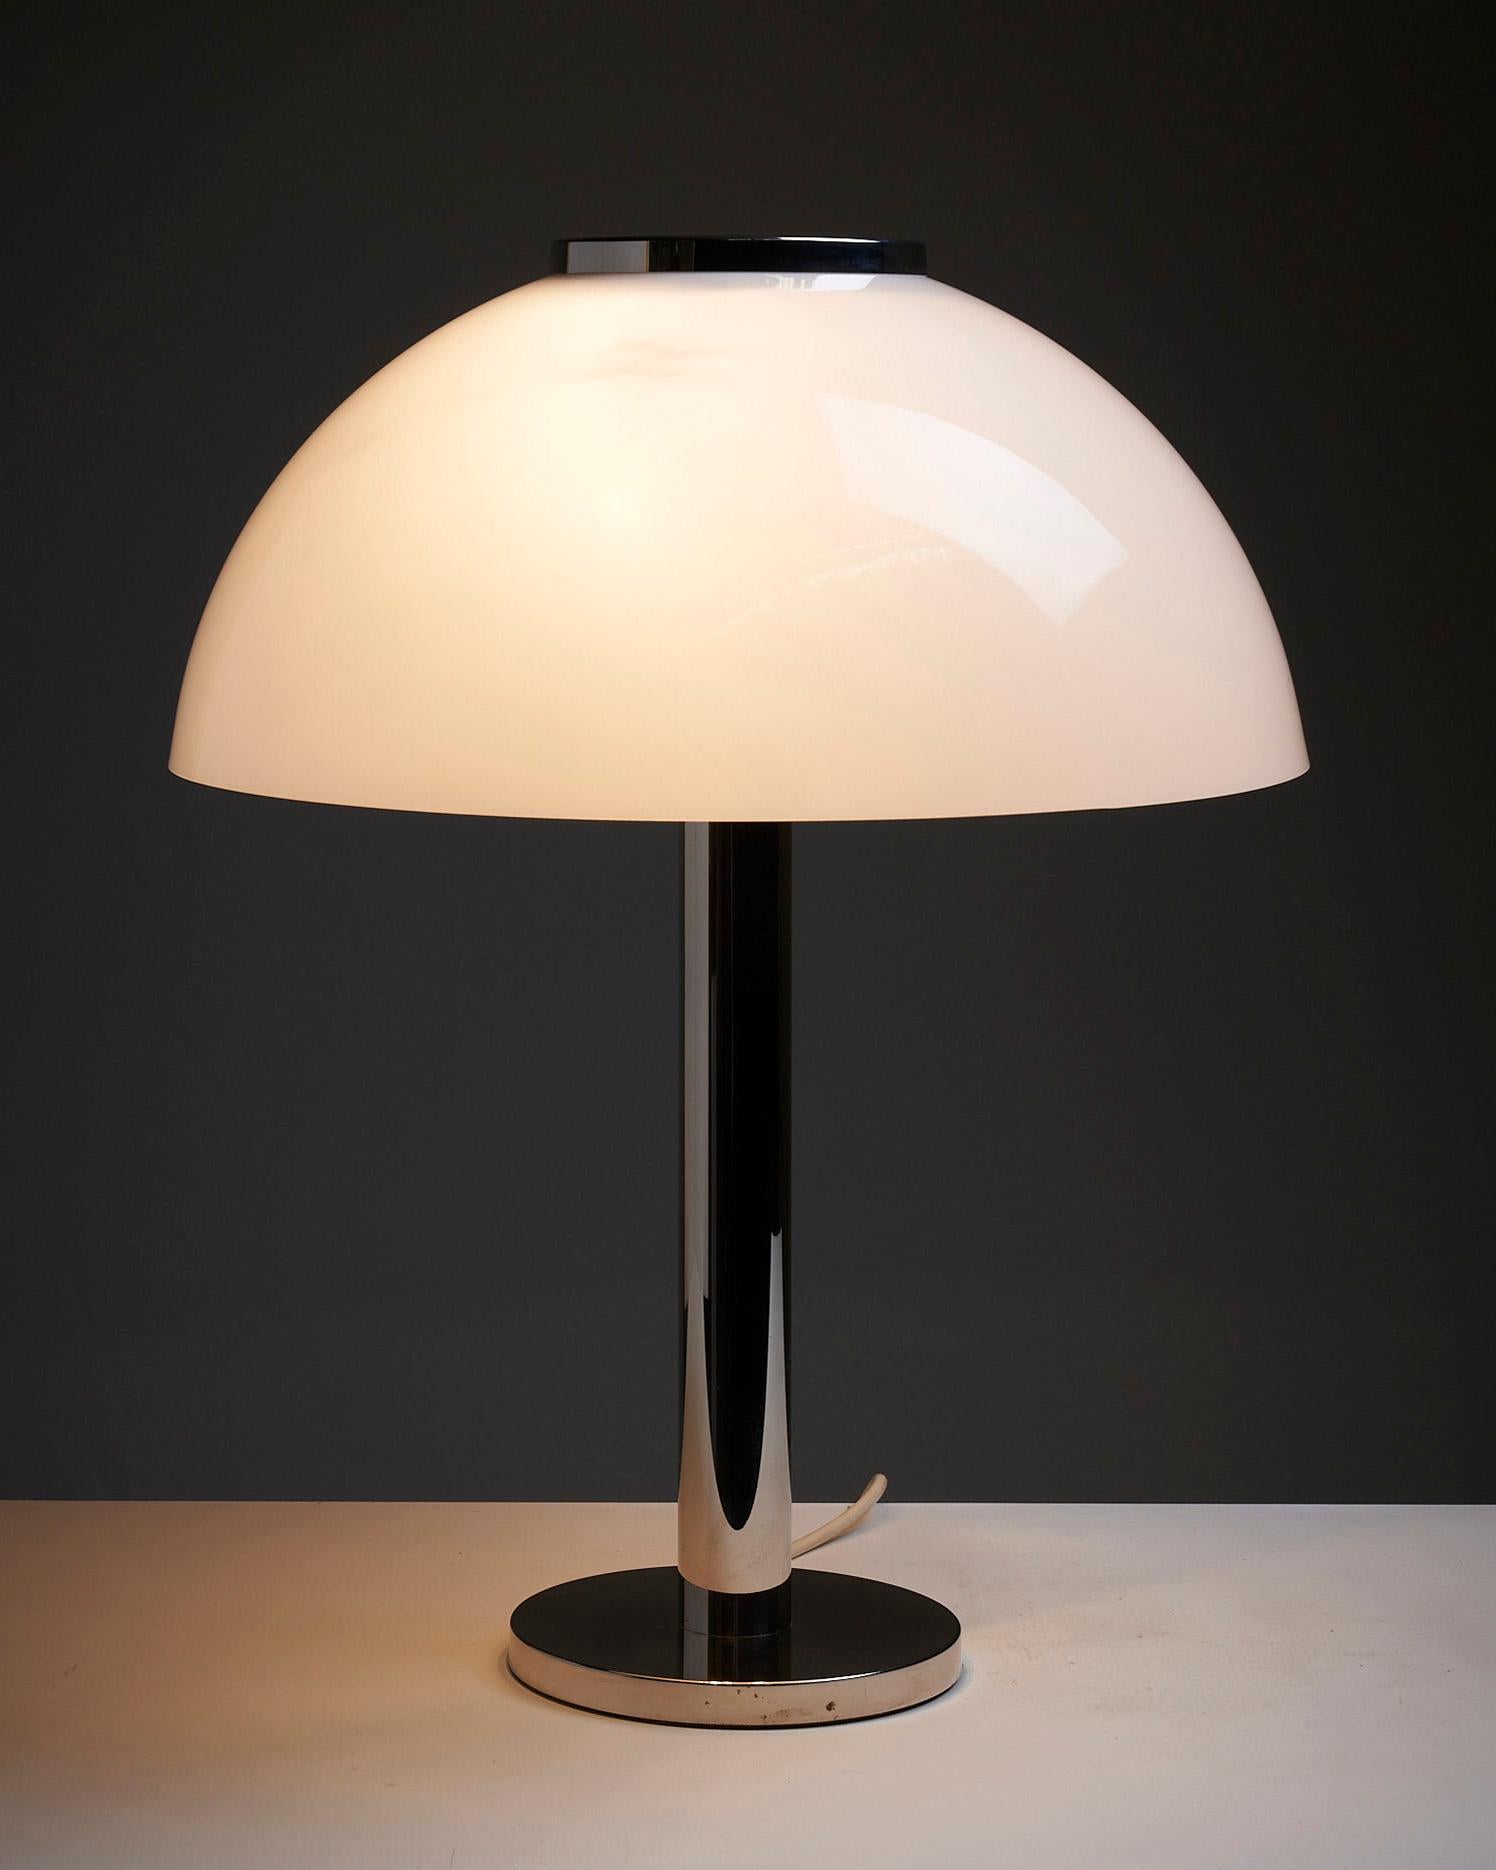 Illuminate your space with the sleek and stylish Dome table lamp by Beisl Leuchten. This German-designed lamp combines a glimmering chrome base and stem, exuding a touch of sophistication and modern elegance.

At the top of the stem, you'll find a